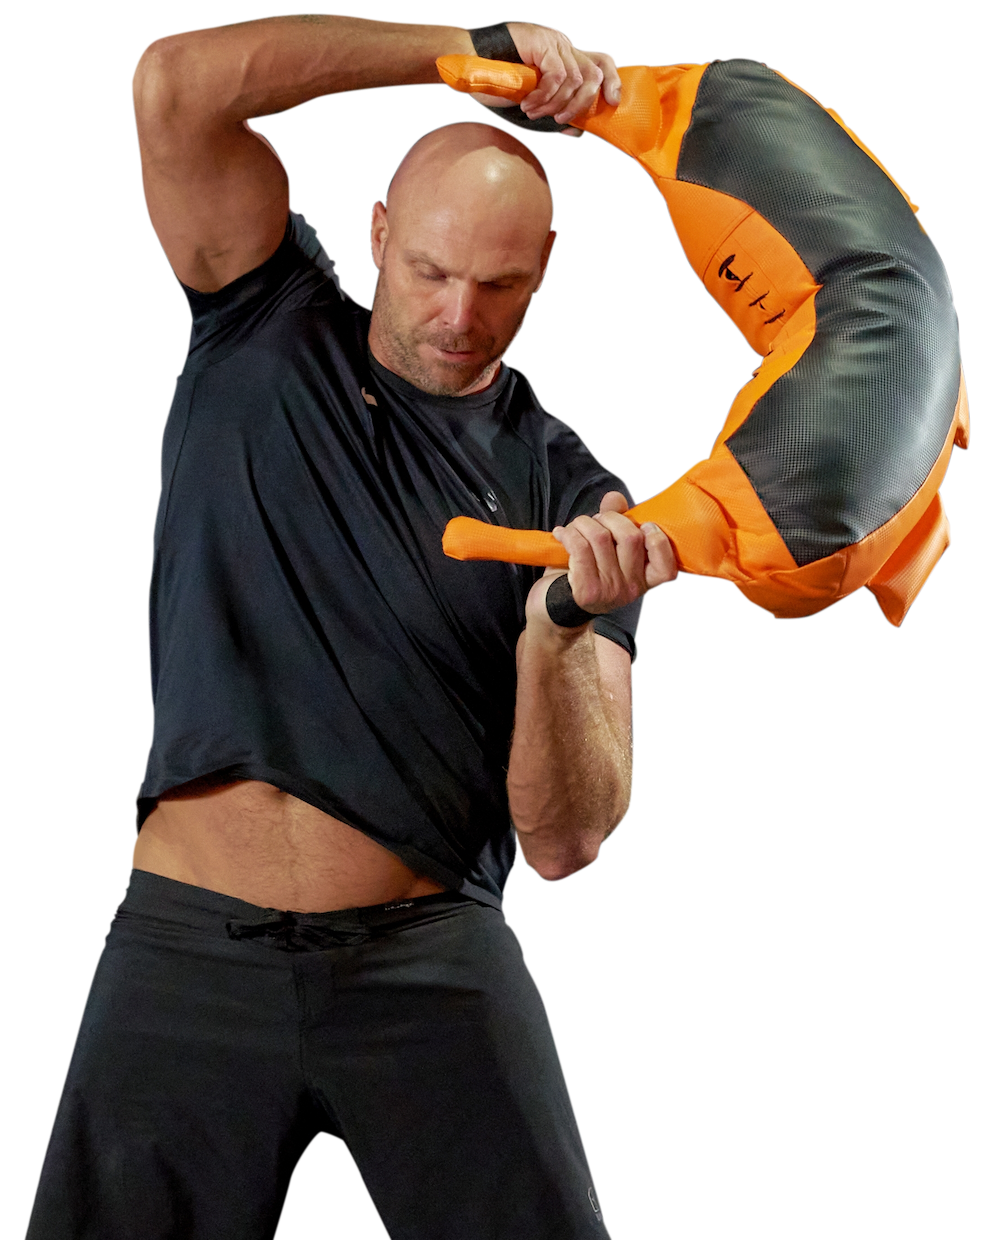 My last acquisition: bulgarian bag (it's really fun) : r/kettlebell